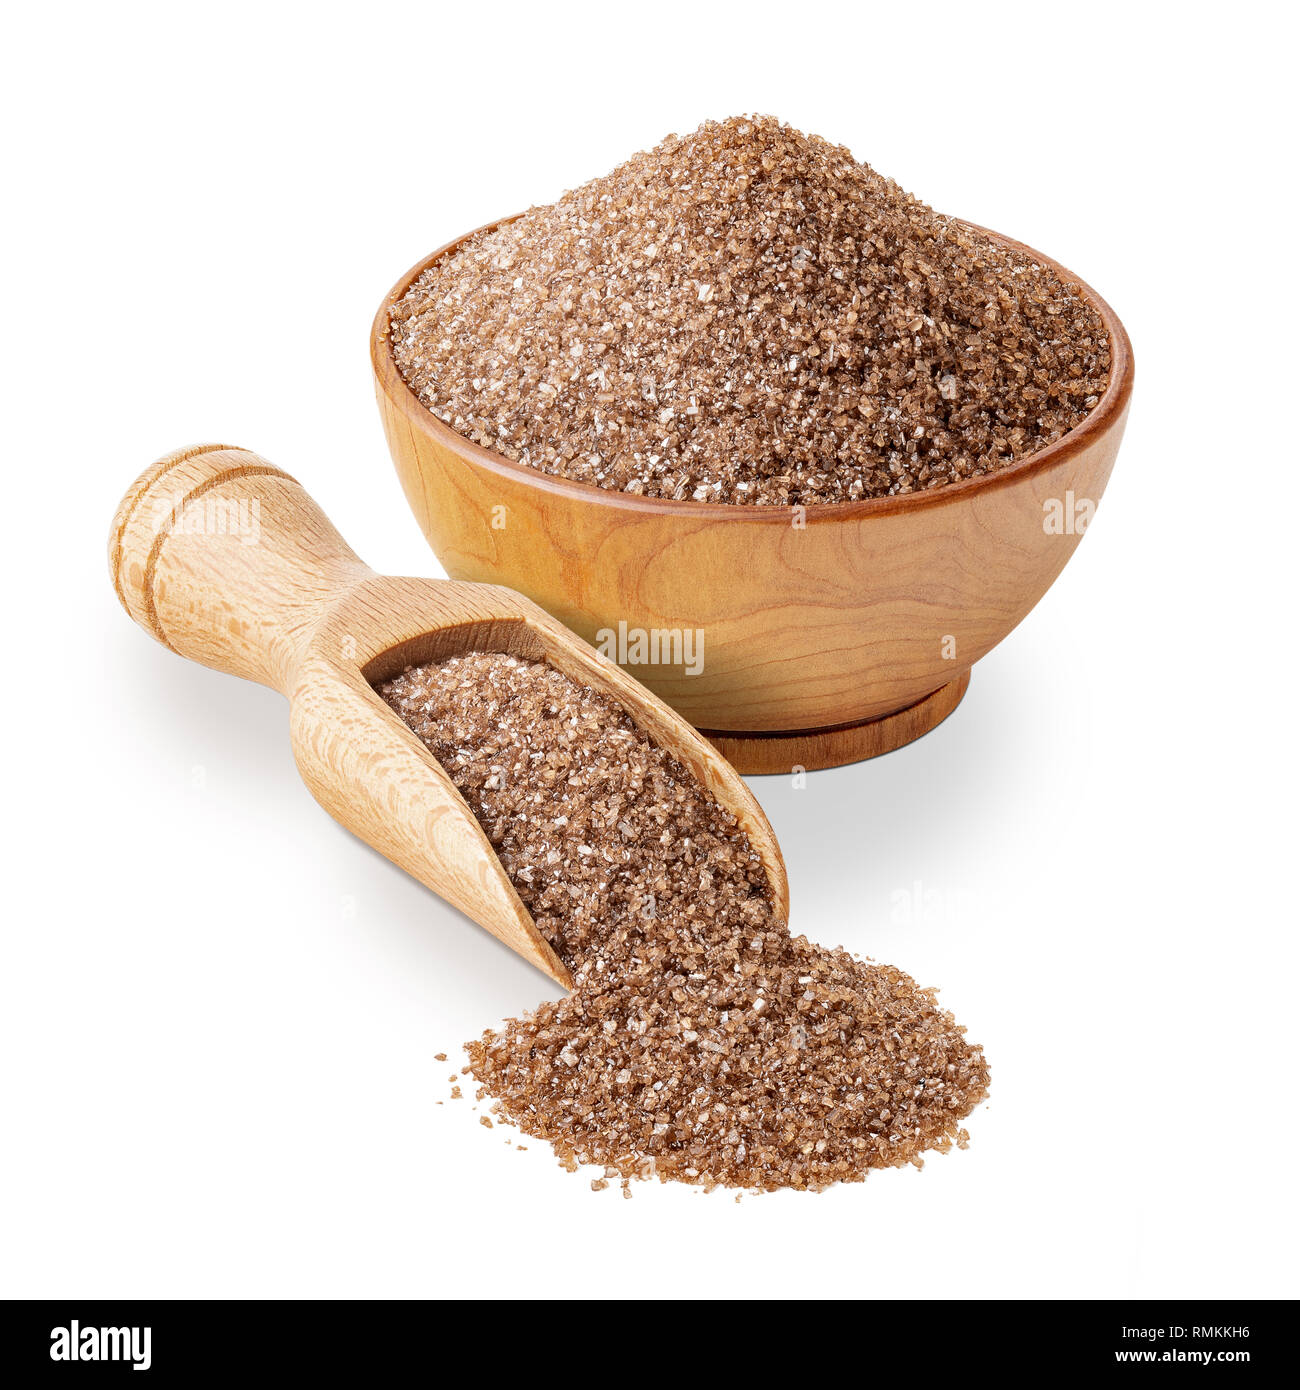 Brown smoked salt in a wooden bowl isolated on white Stock Photo